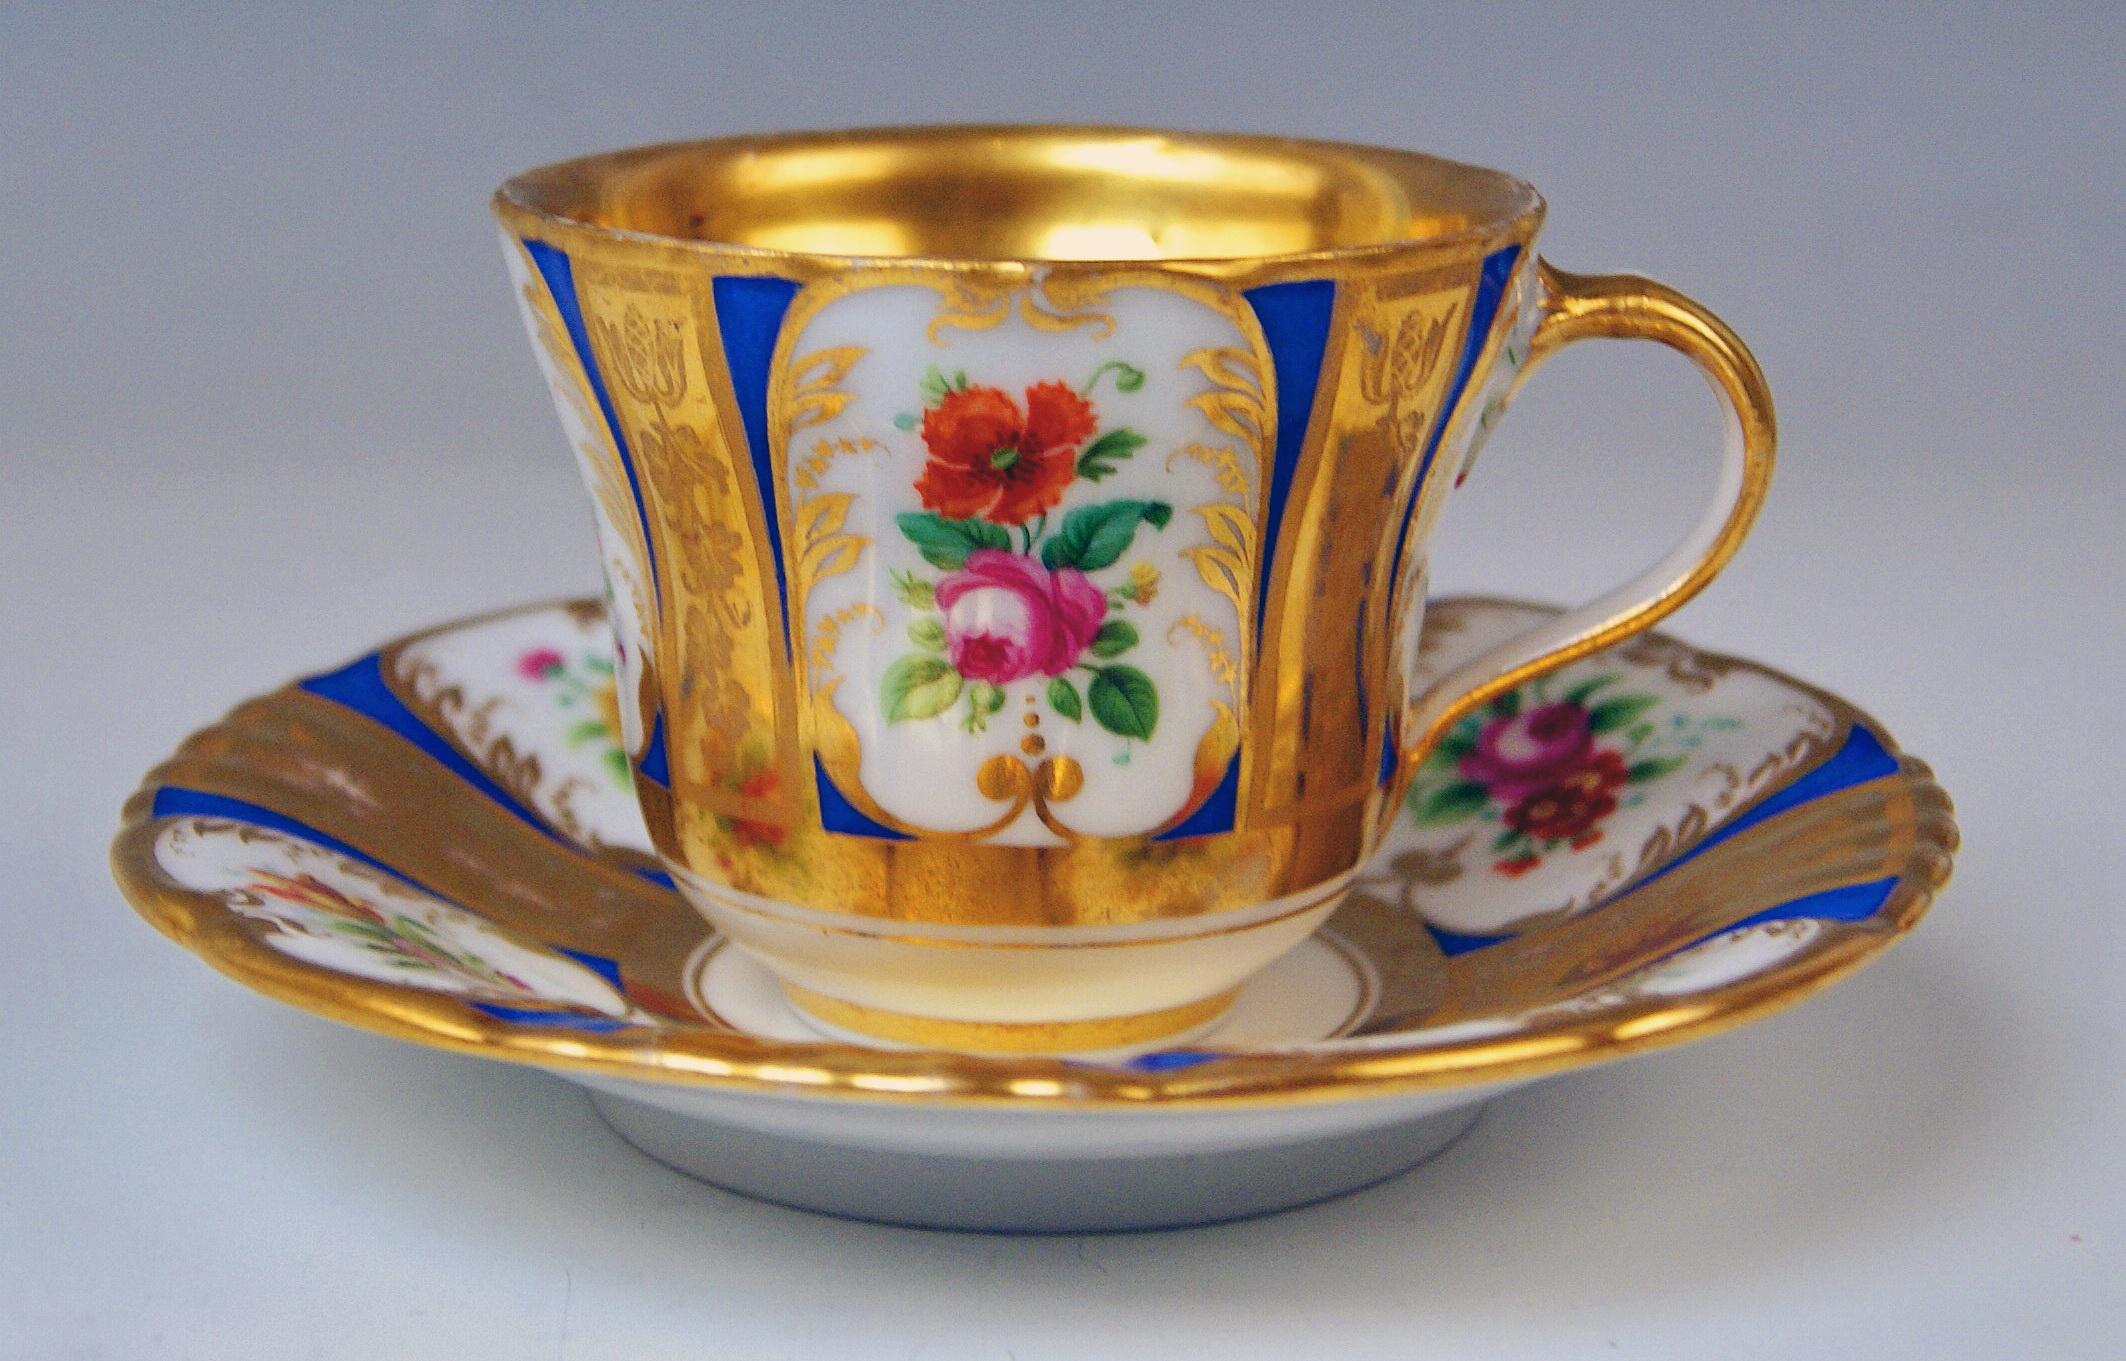 Vienna Imperial Porcelain Cup Saucer Painted with Flowers Golden Shaded, 1855 1